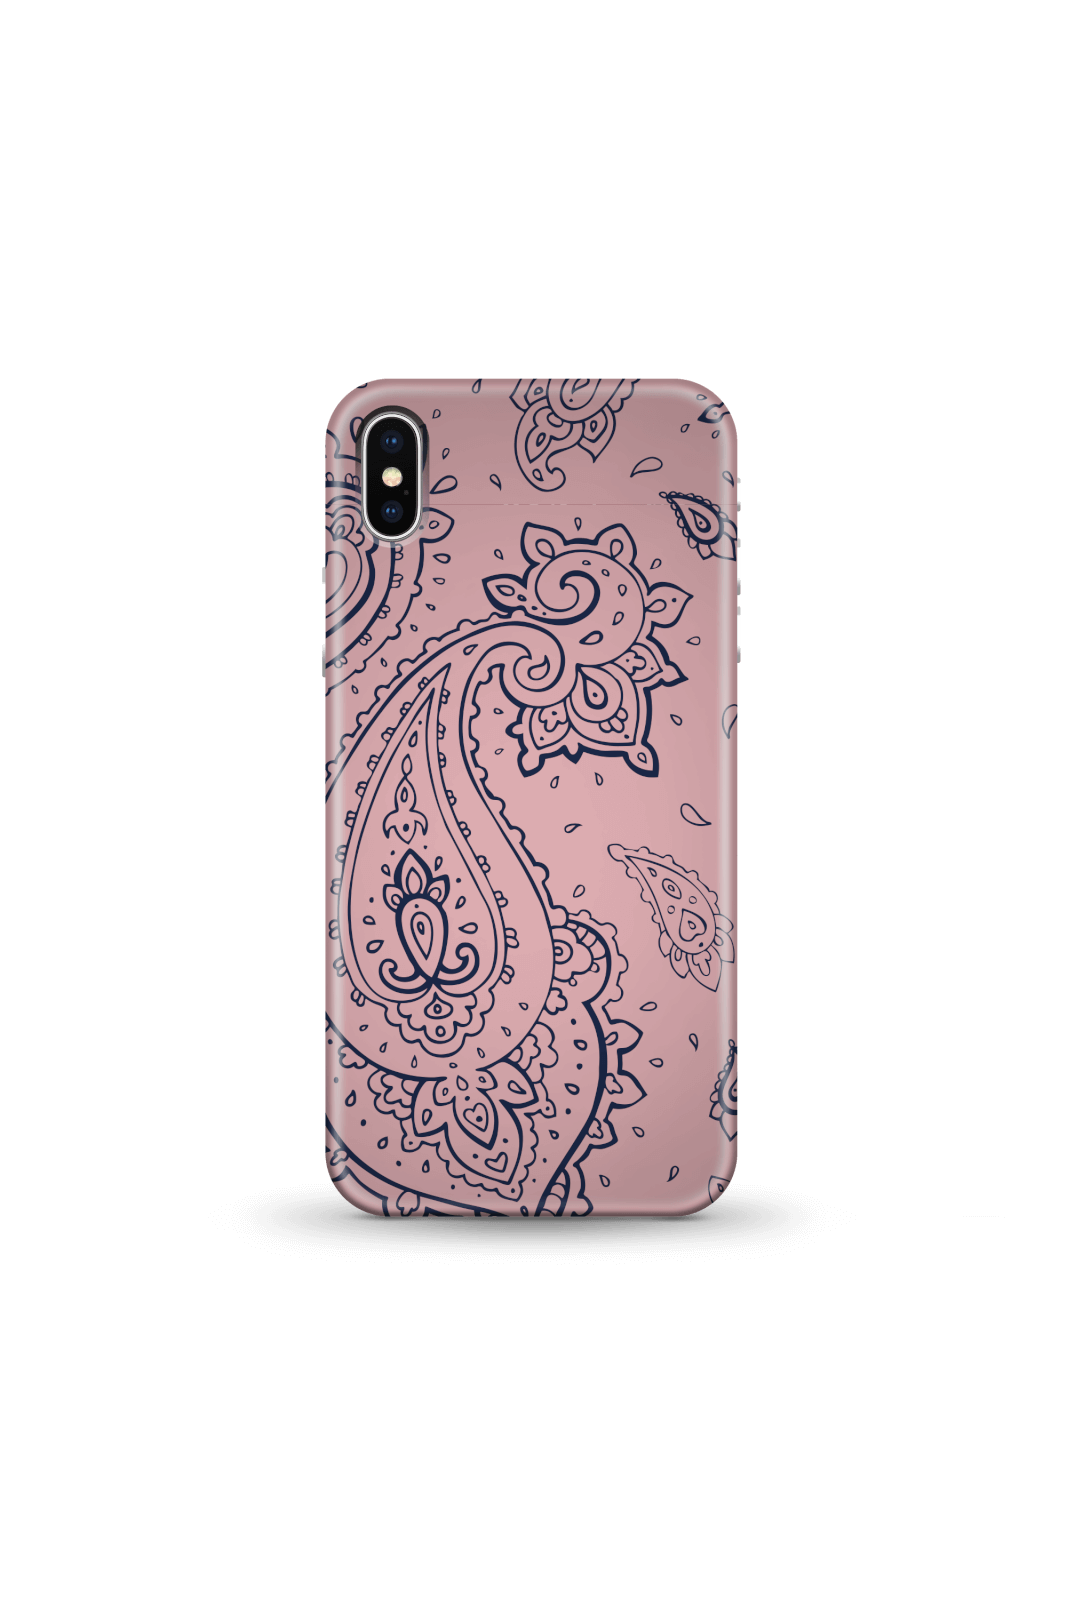 Pink & Blue Paisley Phone Case for iPhone and Android - iPhone 5/5s - Snap Case - Matte